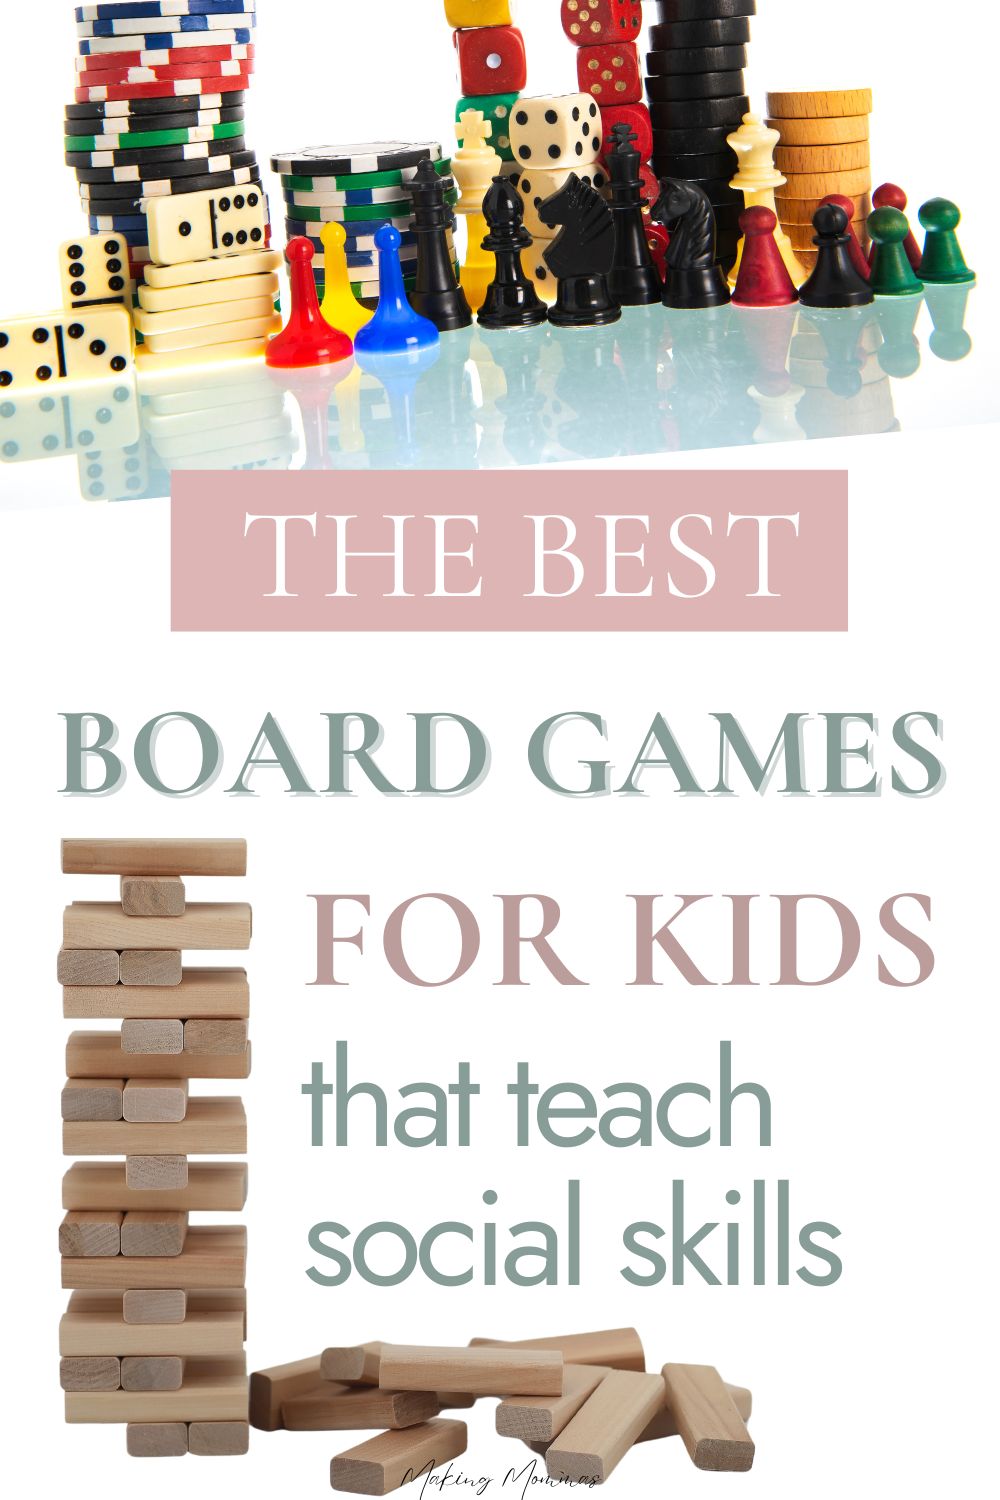 Pin image reading, "the best board games for kids that teach social skills," with an image of Jenga on the bottom and a bunch of game pieces on the top.